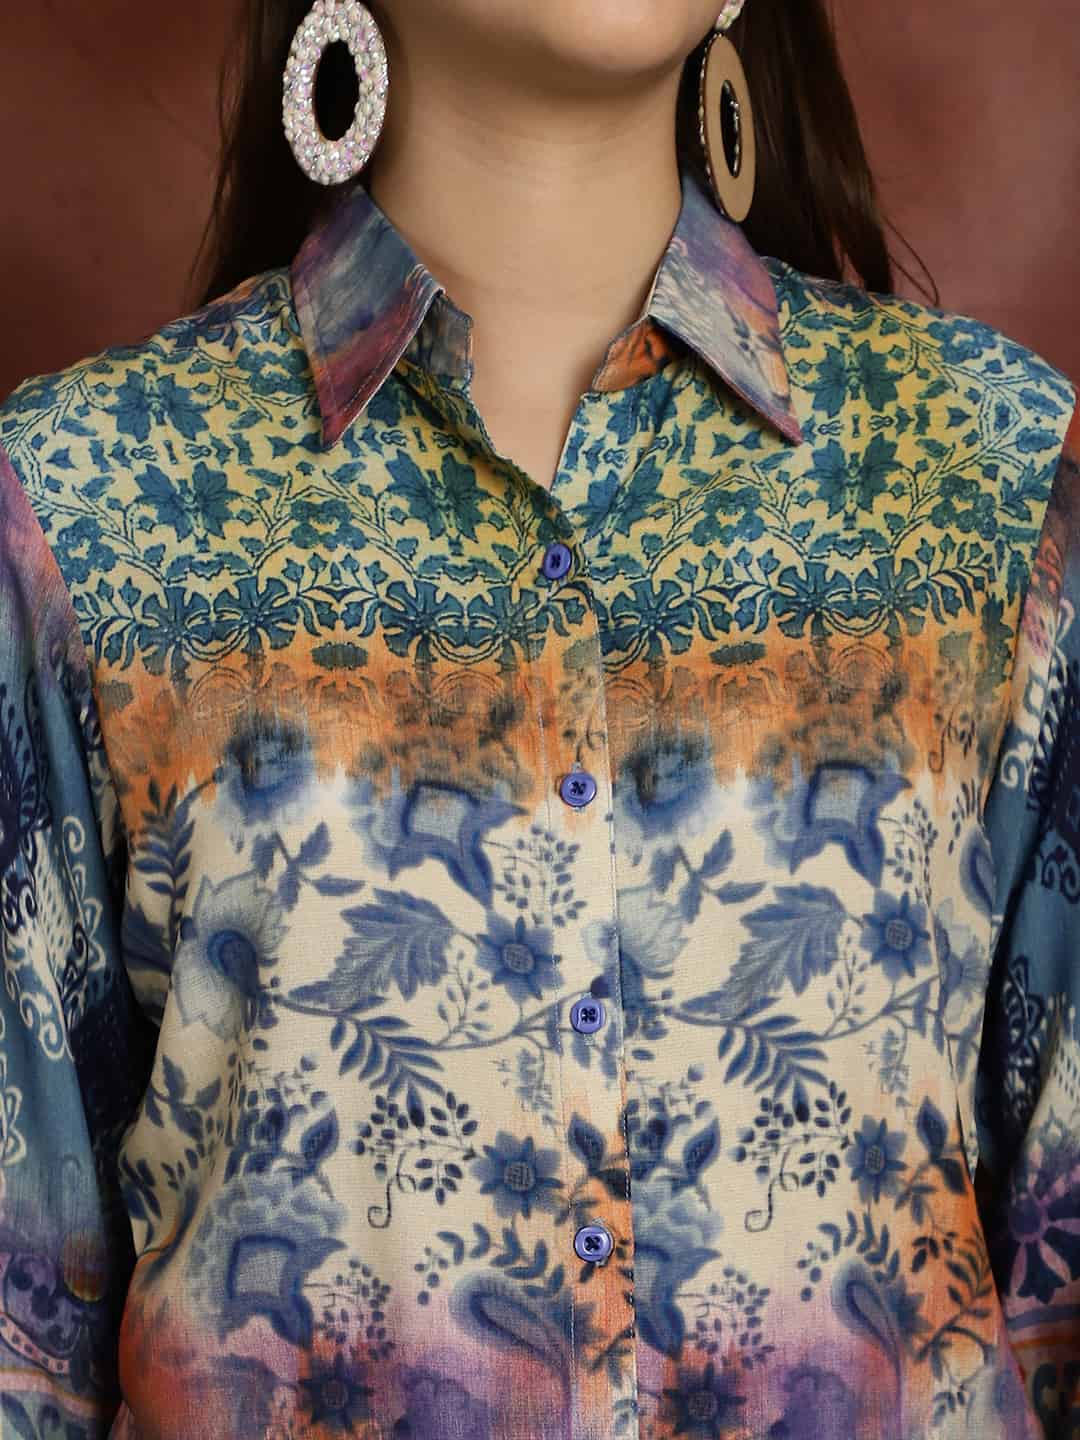 Blue Abstract Printed Chanderi Silk Shirt With Trousers Co-ord Set Claura Designs Pvt. Ltd. Cord set Chanderi Silk, Co-ord Set, Ethnic, Floral, Full Sleeves, Rayon